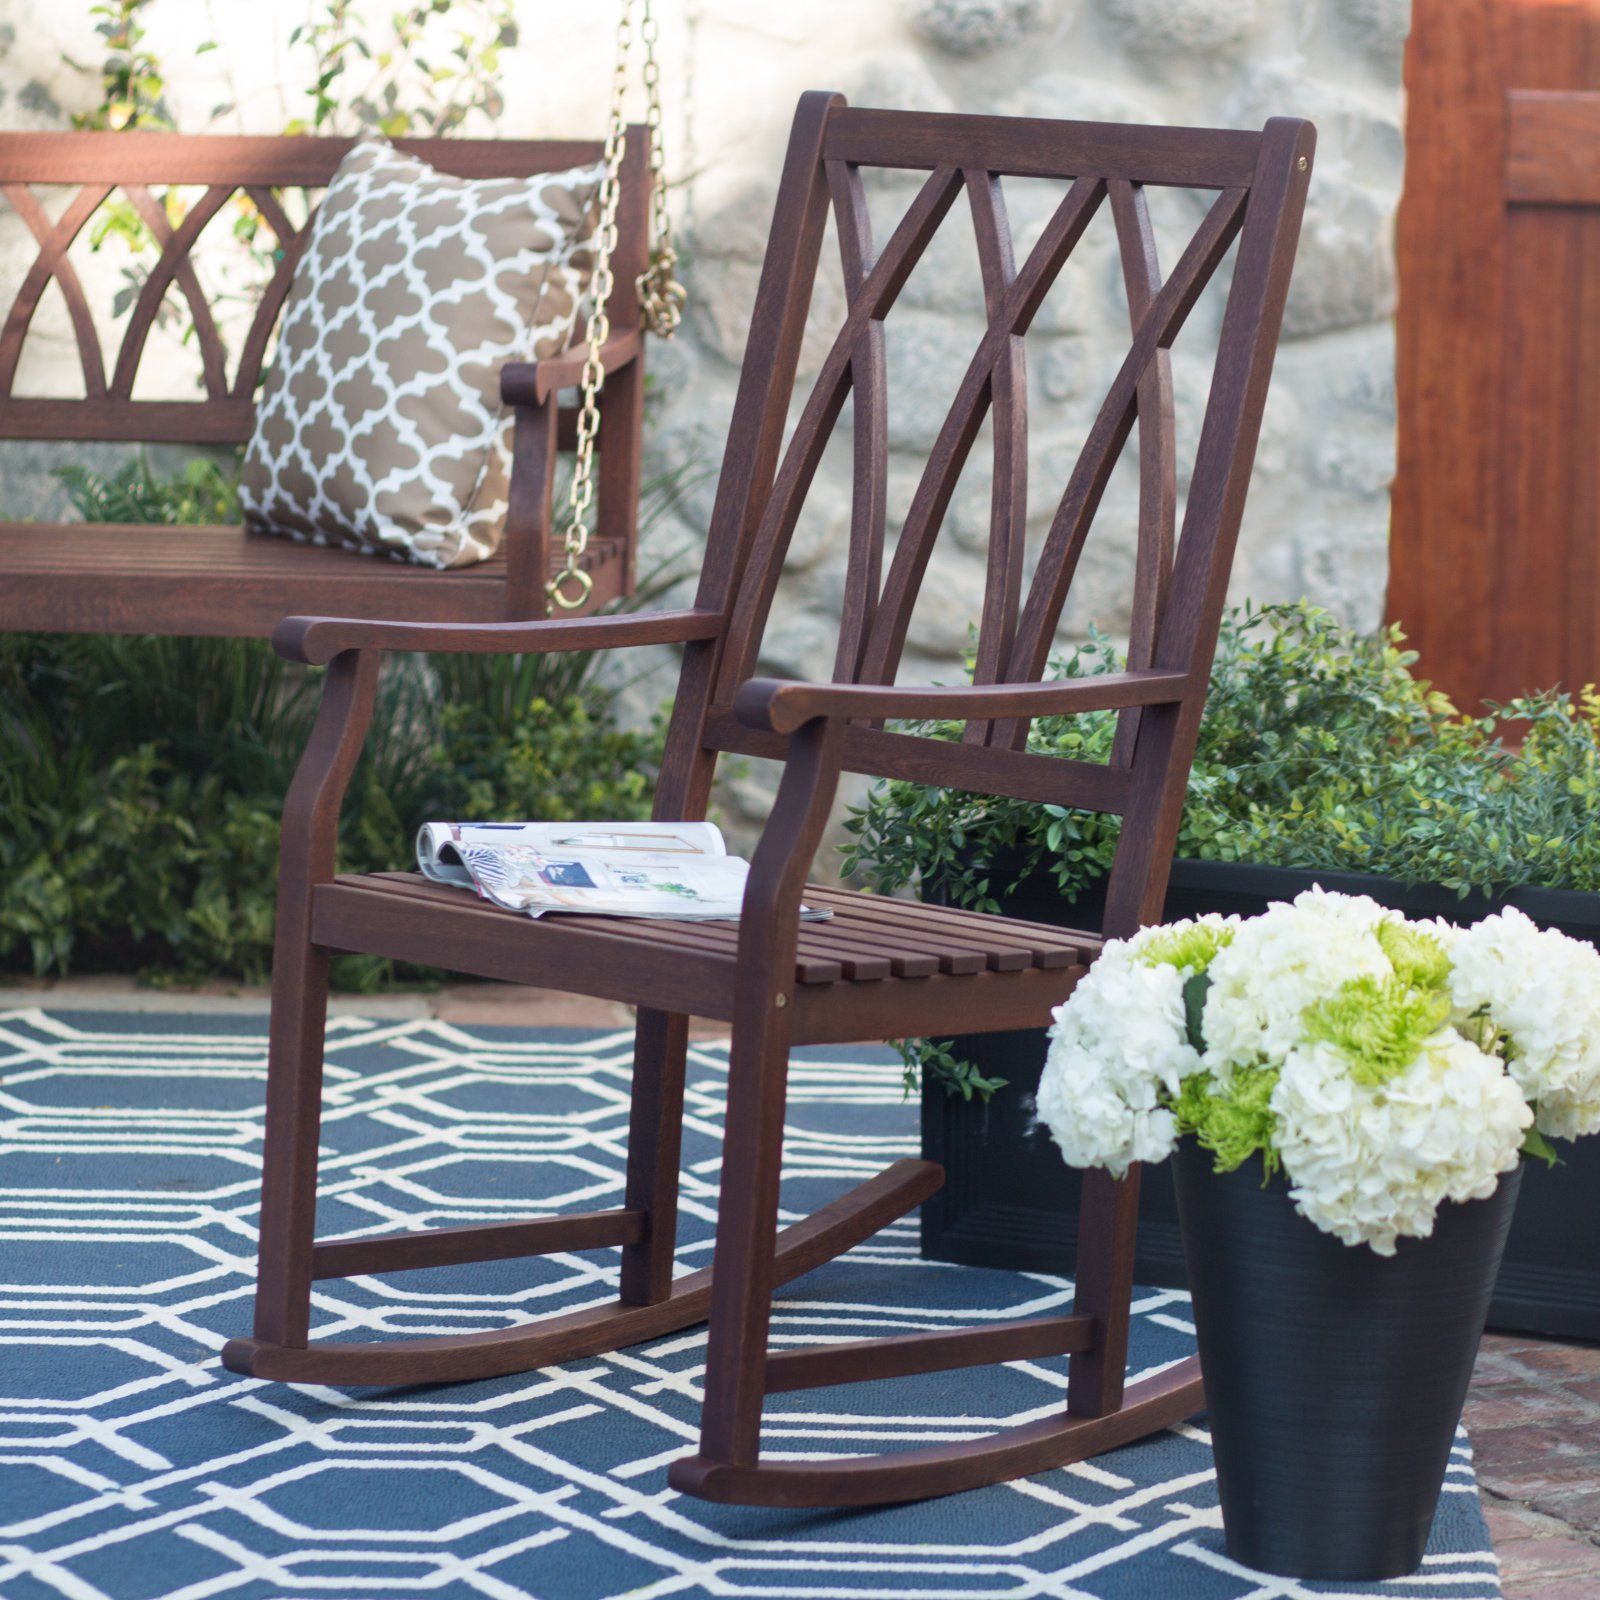 Cozy outdoor rocking chairs